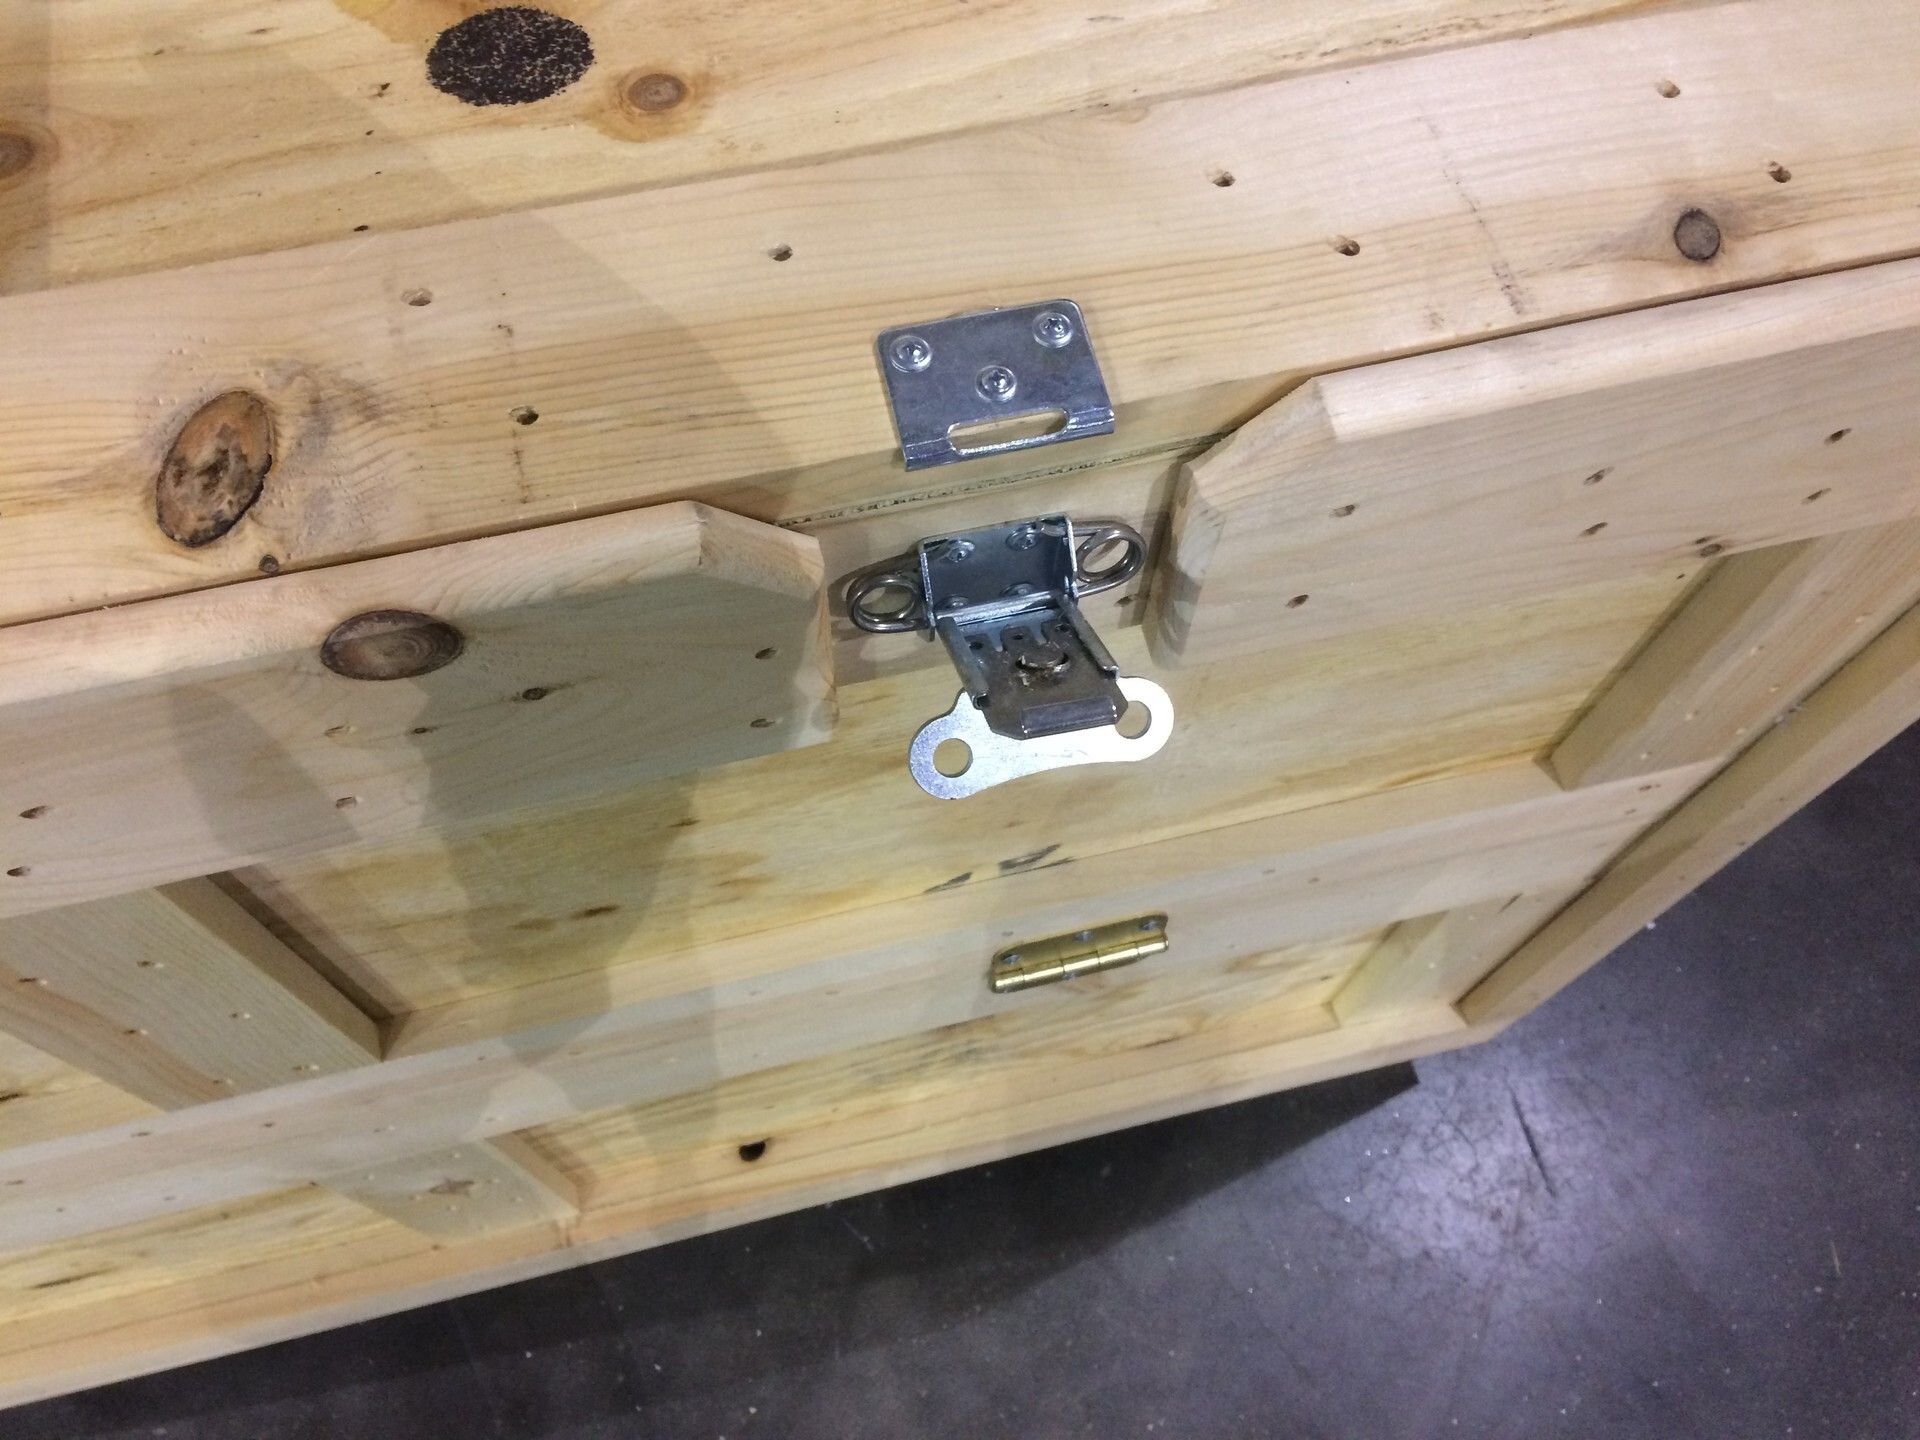 In this photo is a "tradeshow crate" with link locks.  The custom wood shipping crate is to ship antiques, electronics.